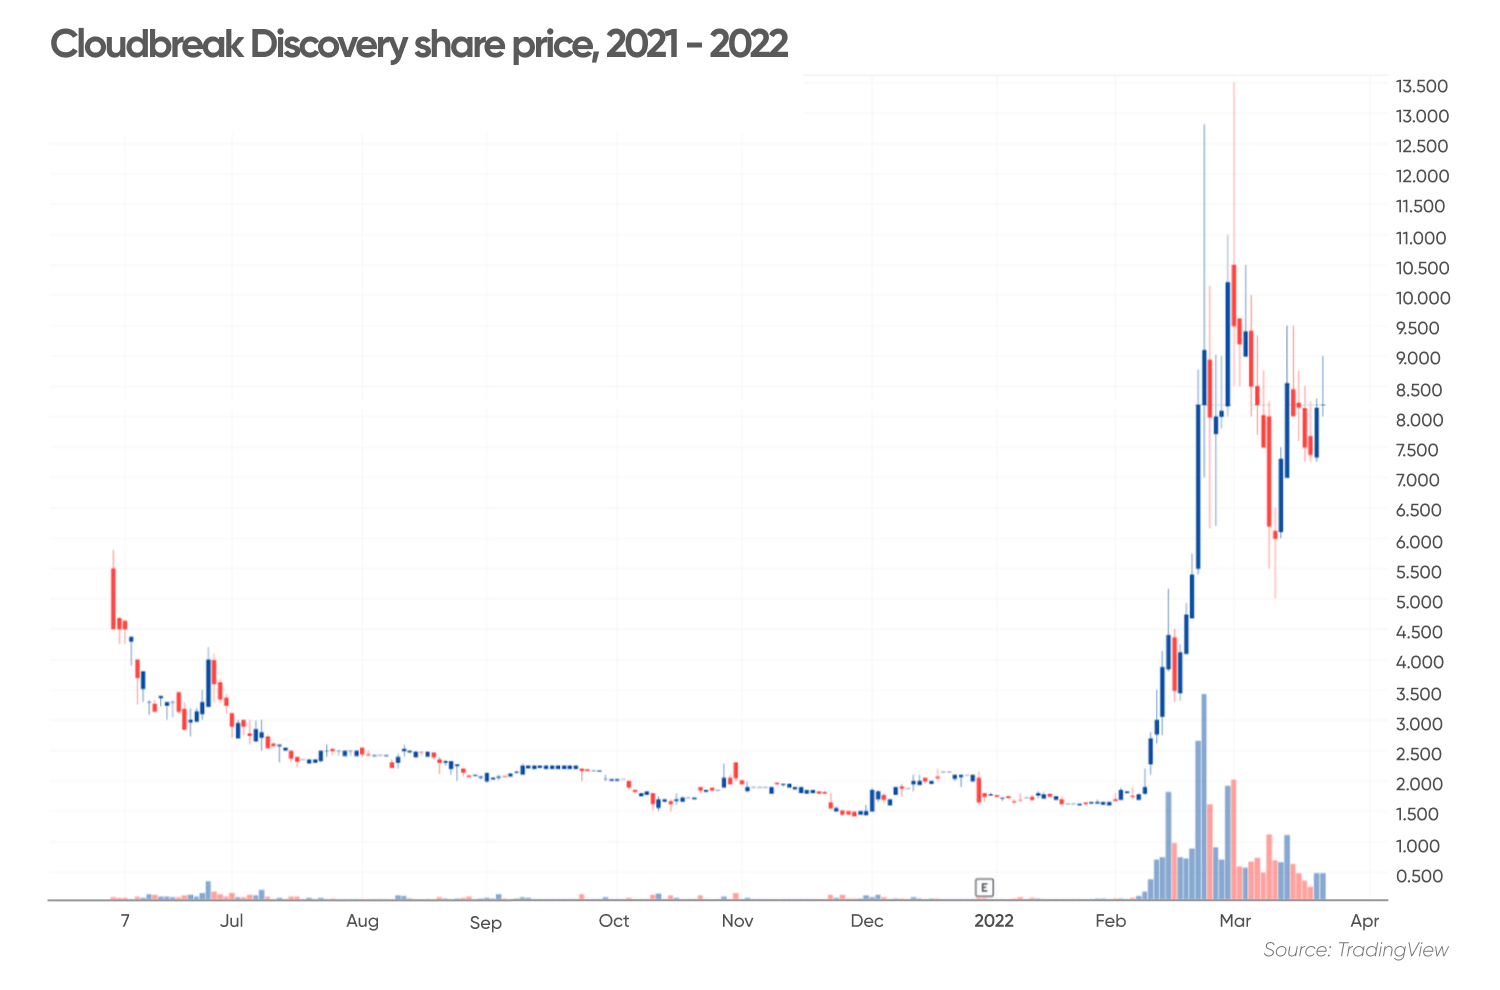 Cloudbreak Discovery share price 2021-2022